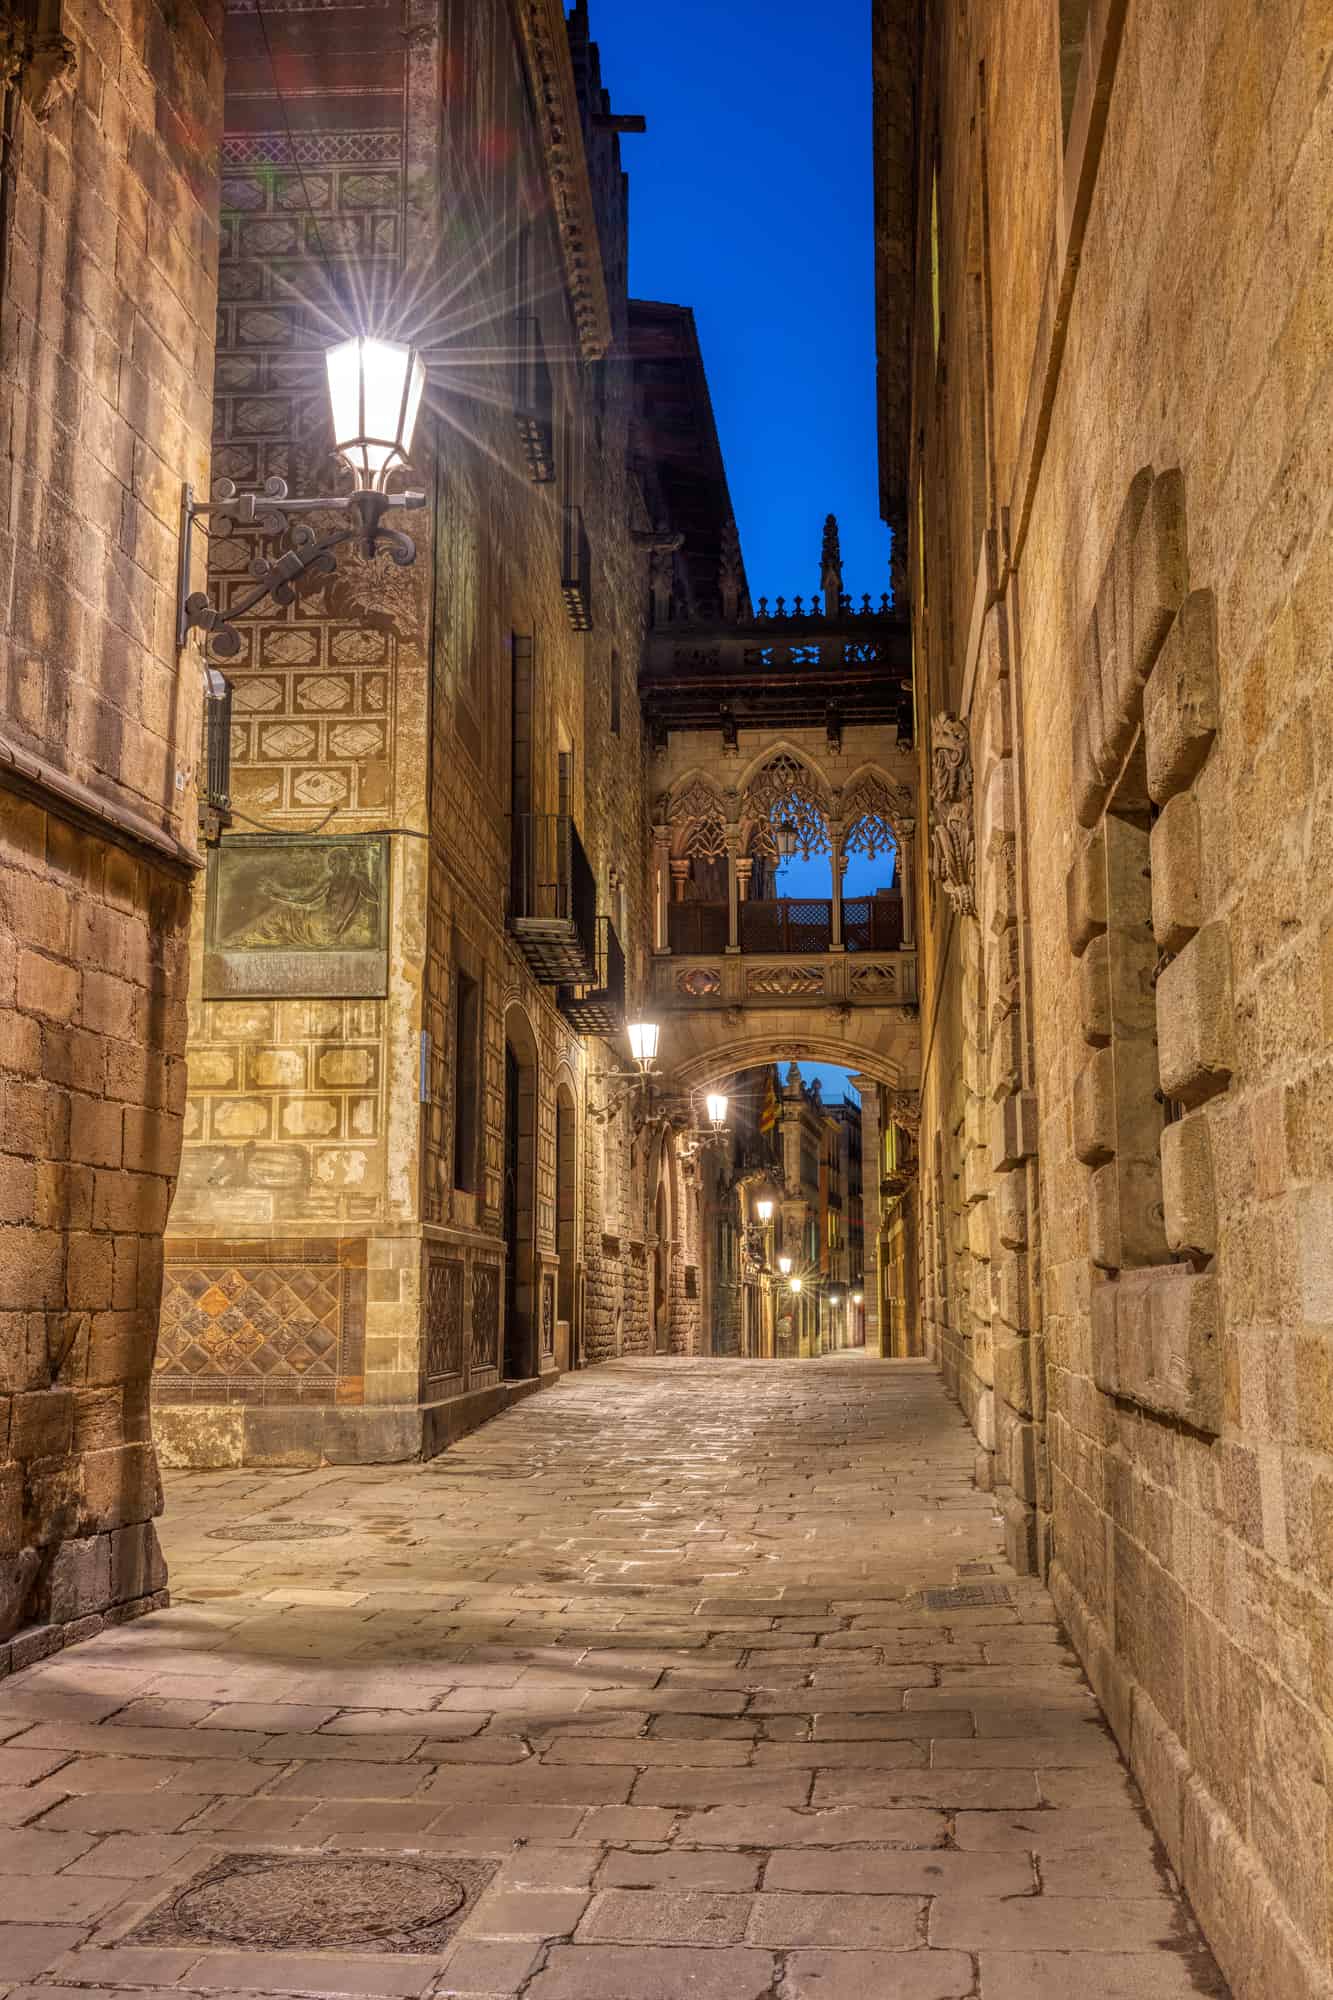 The historic Barrio Gotico in Barcelona at night with the Pont del Bispe